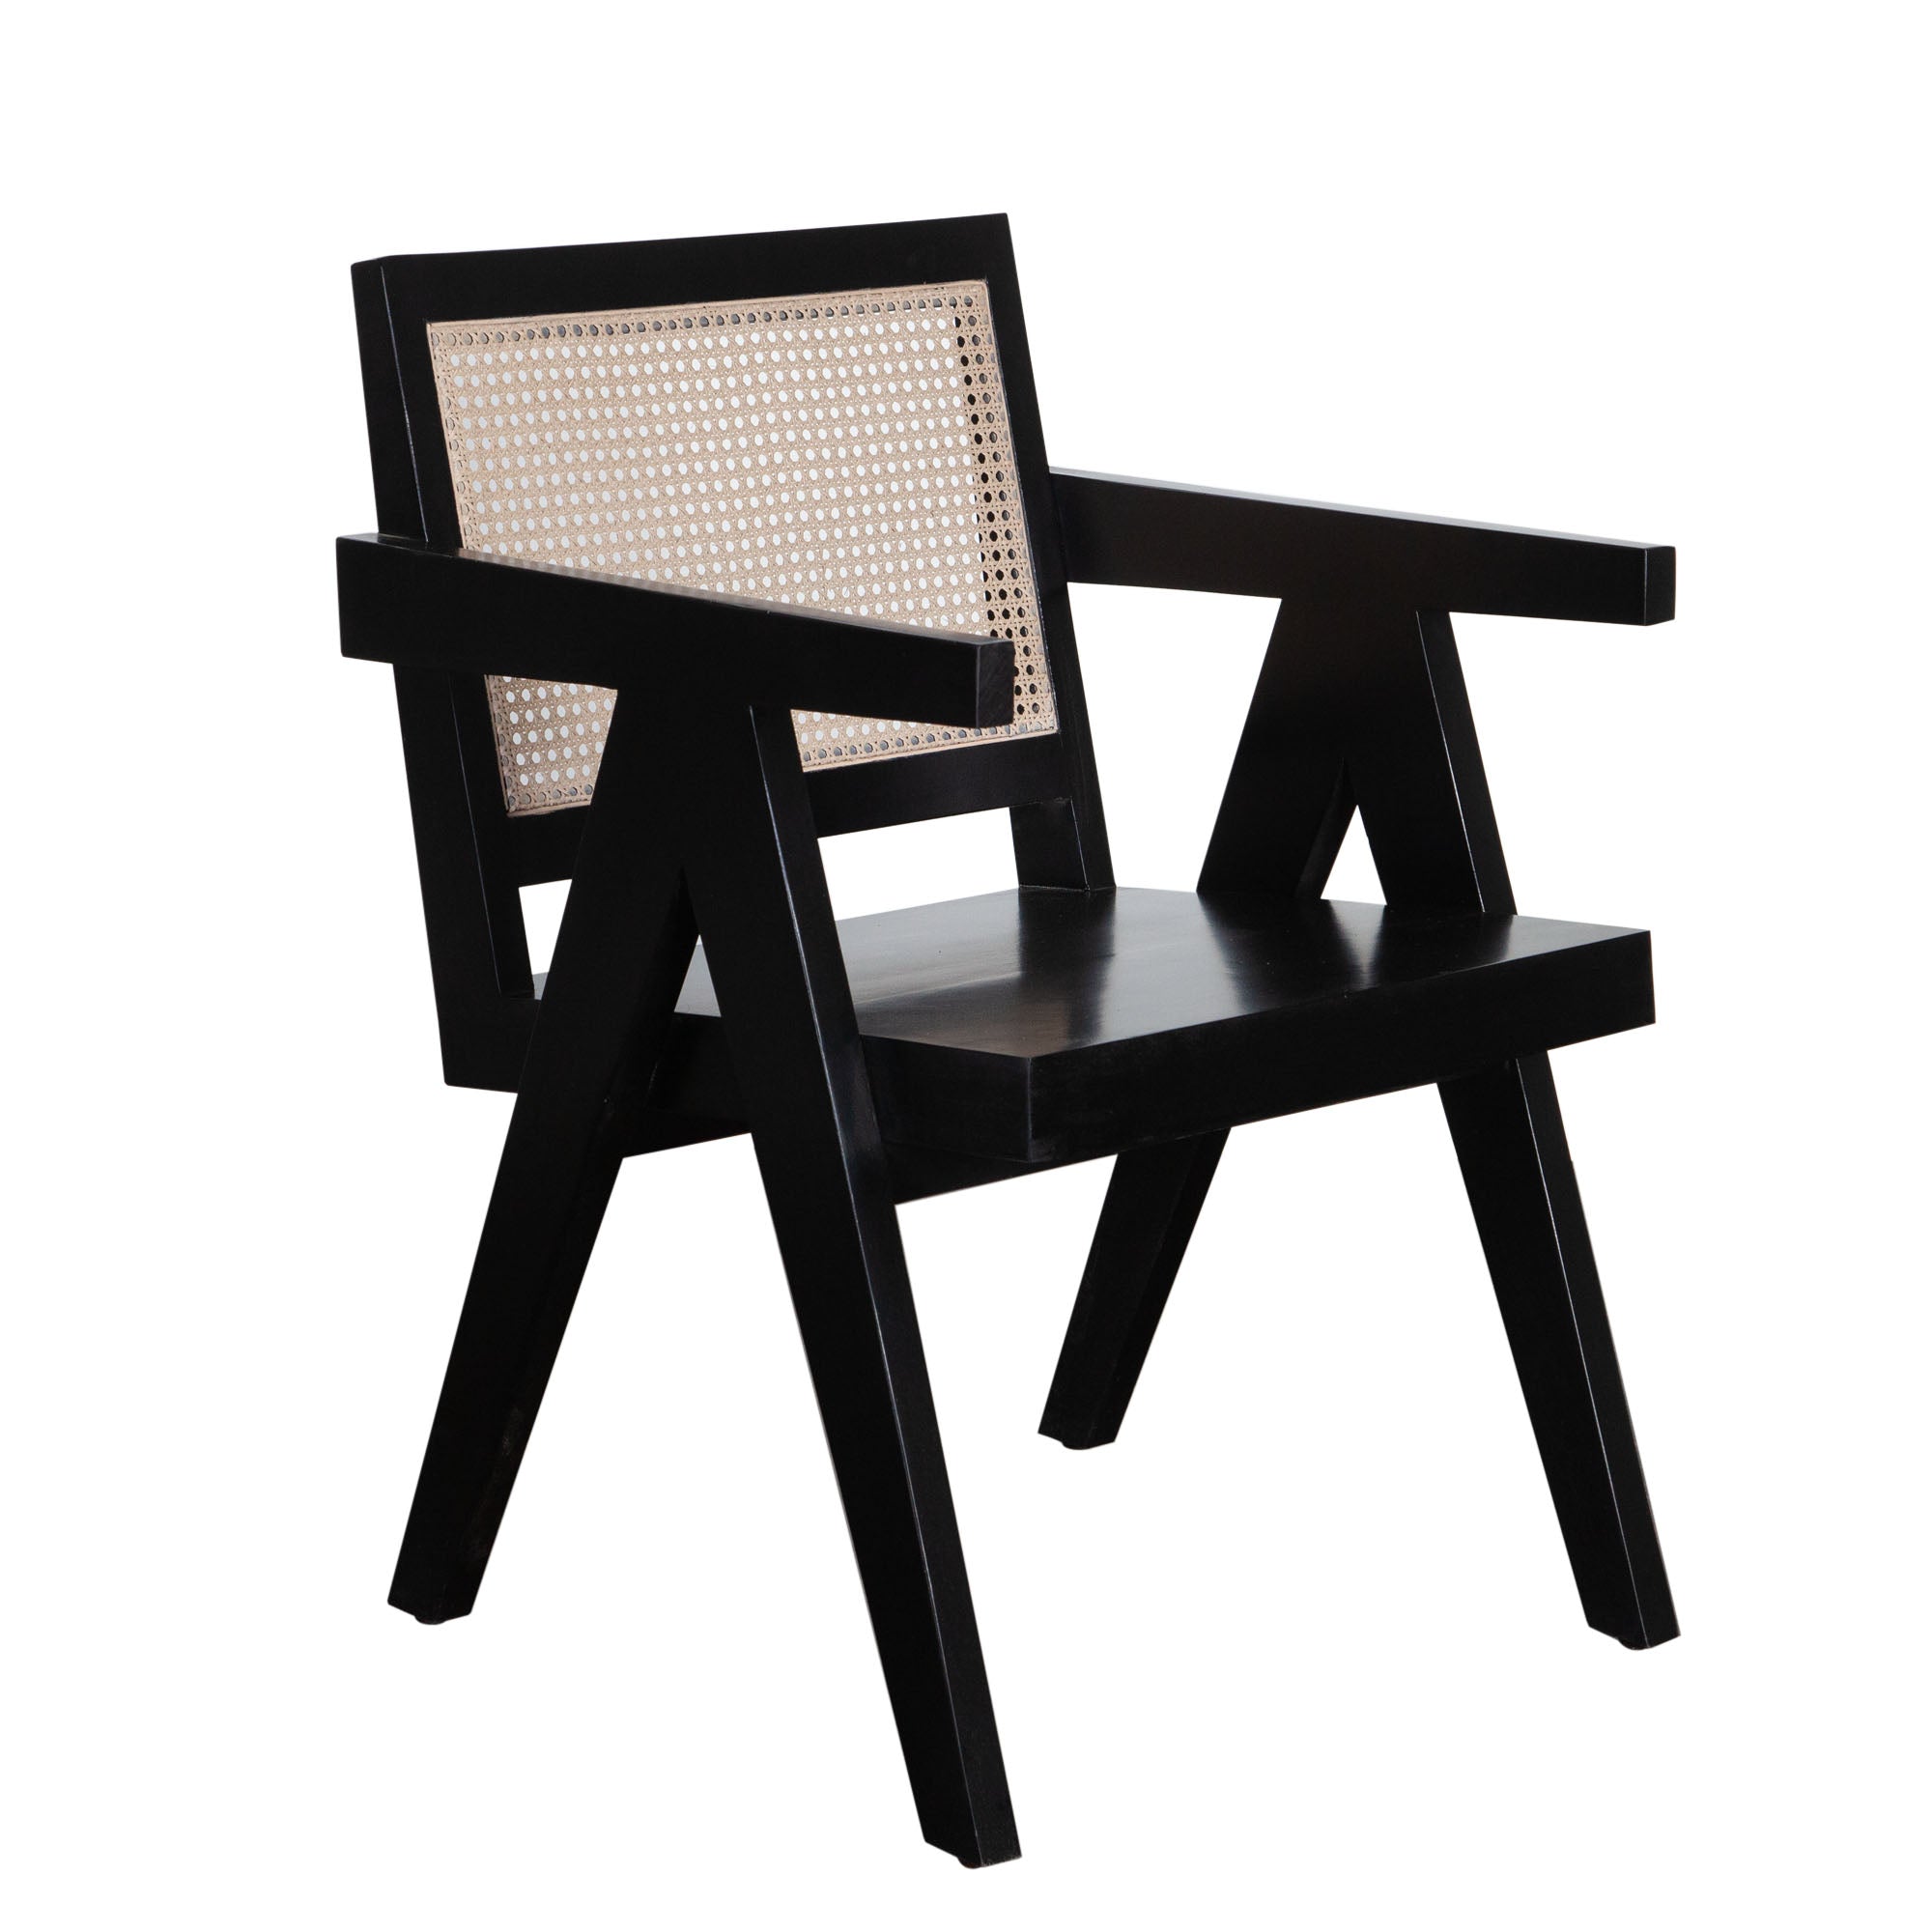 Carter Cane Dining Chair - Black